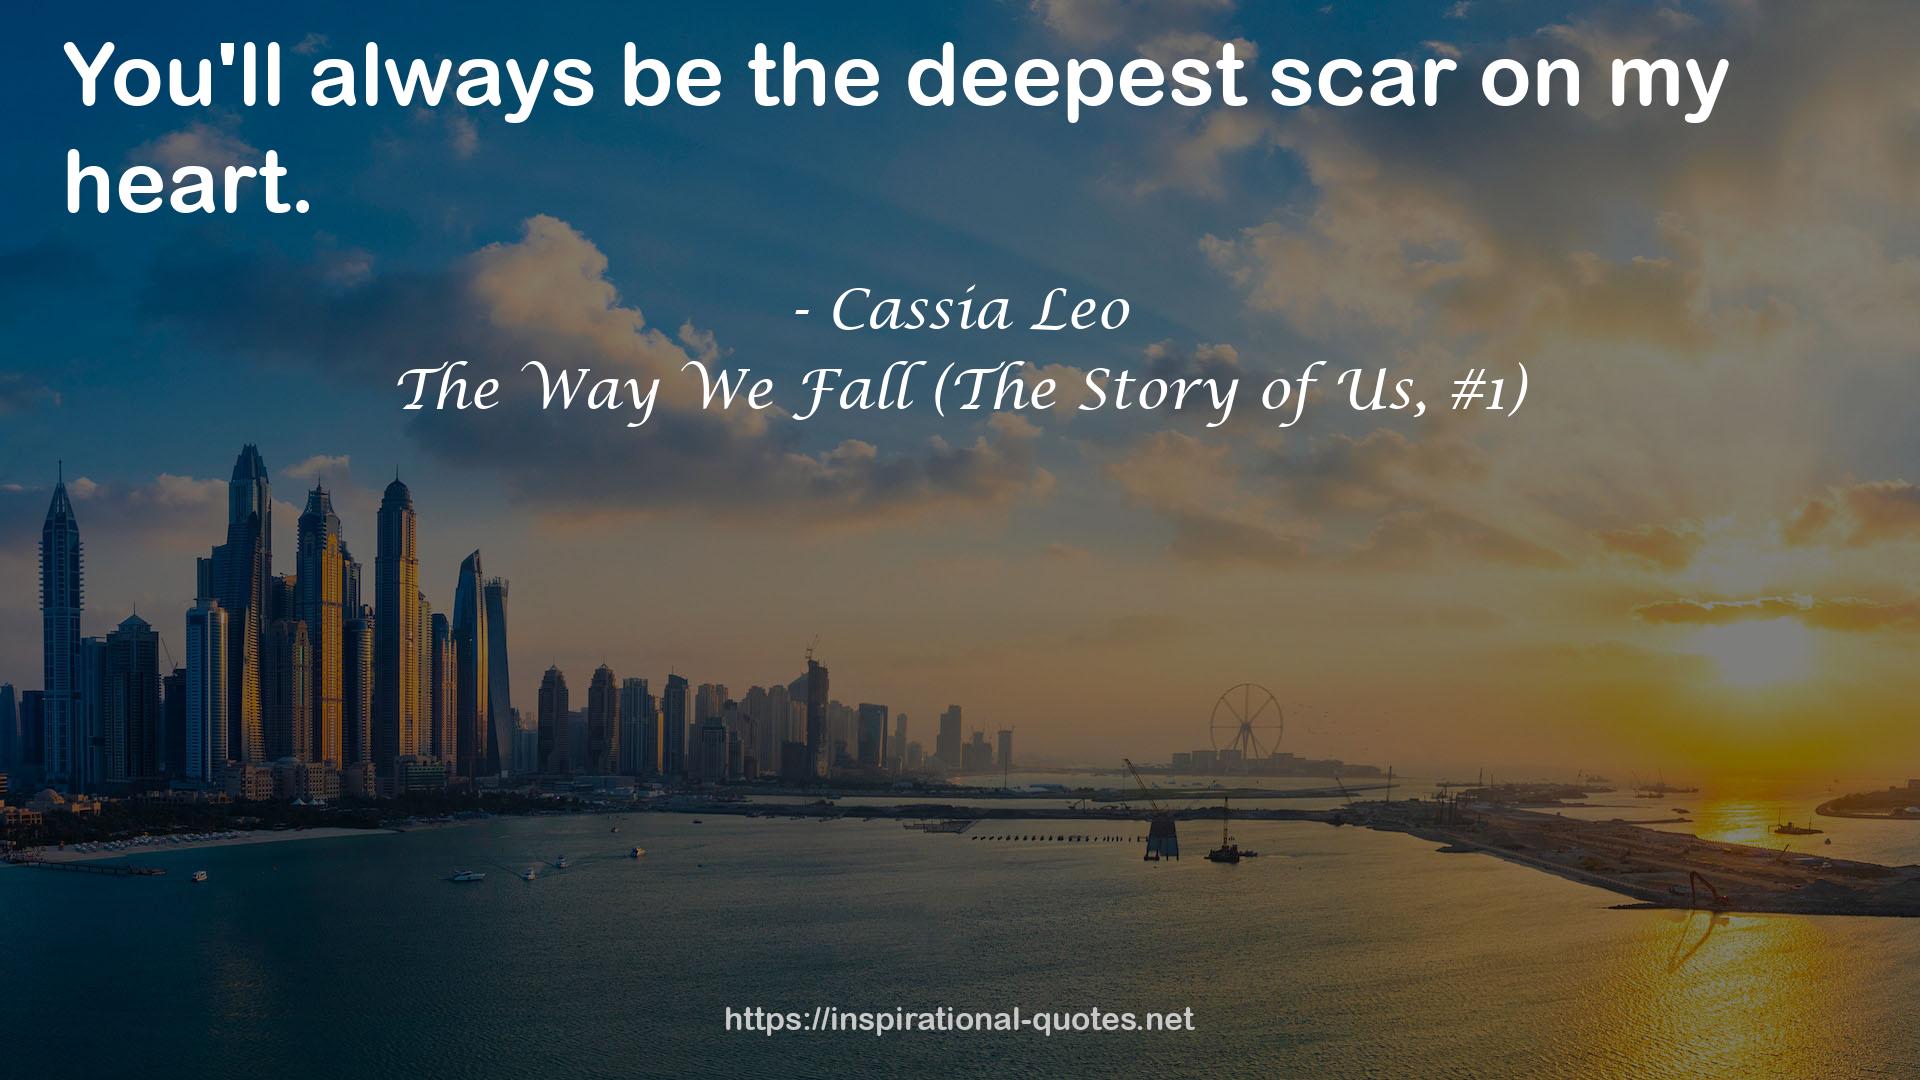 The Way We Fall (The Story of Us, #1) QUOTES